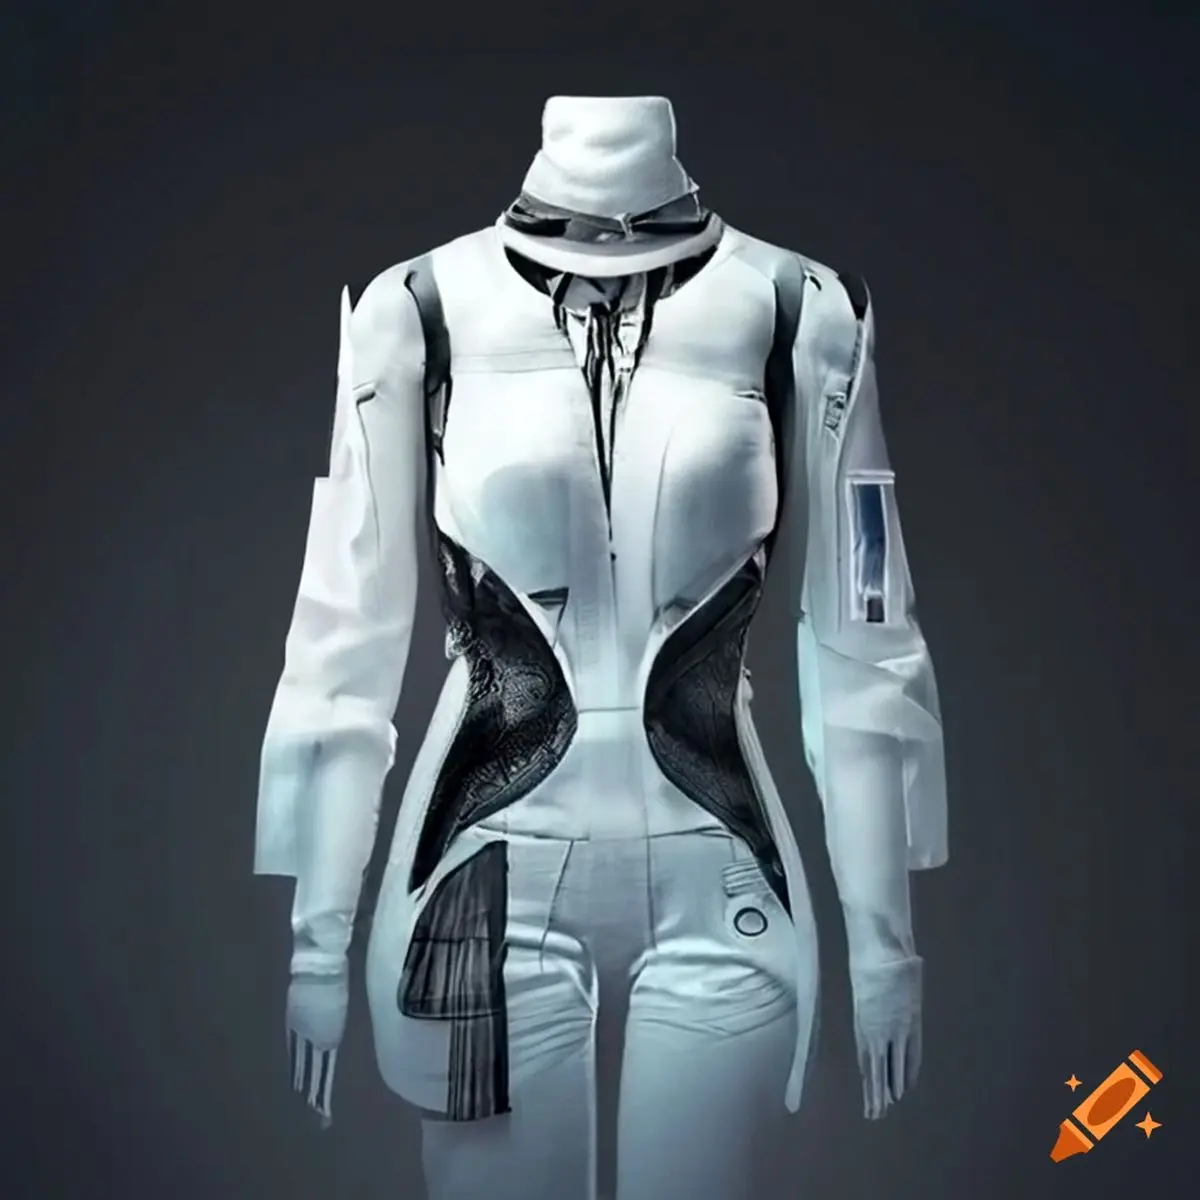 craiyon_102908_highly_detailed_futuristic_fashion_for_space_travel__white__clean_garments